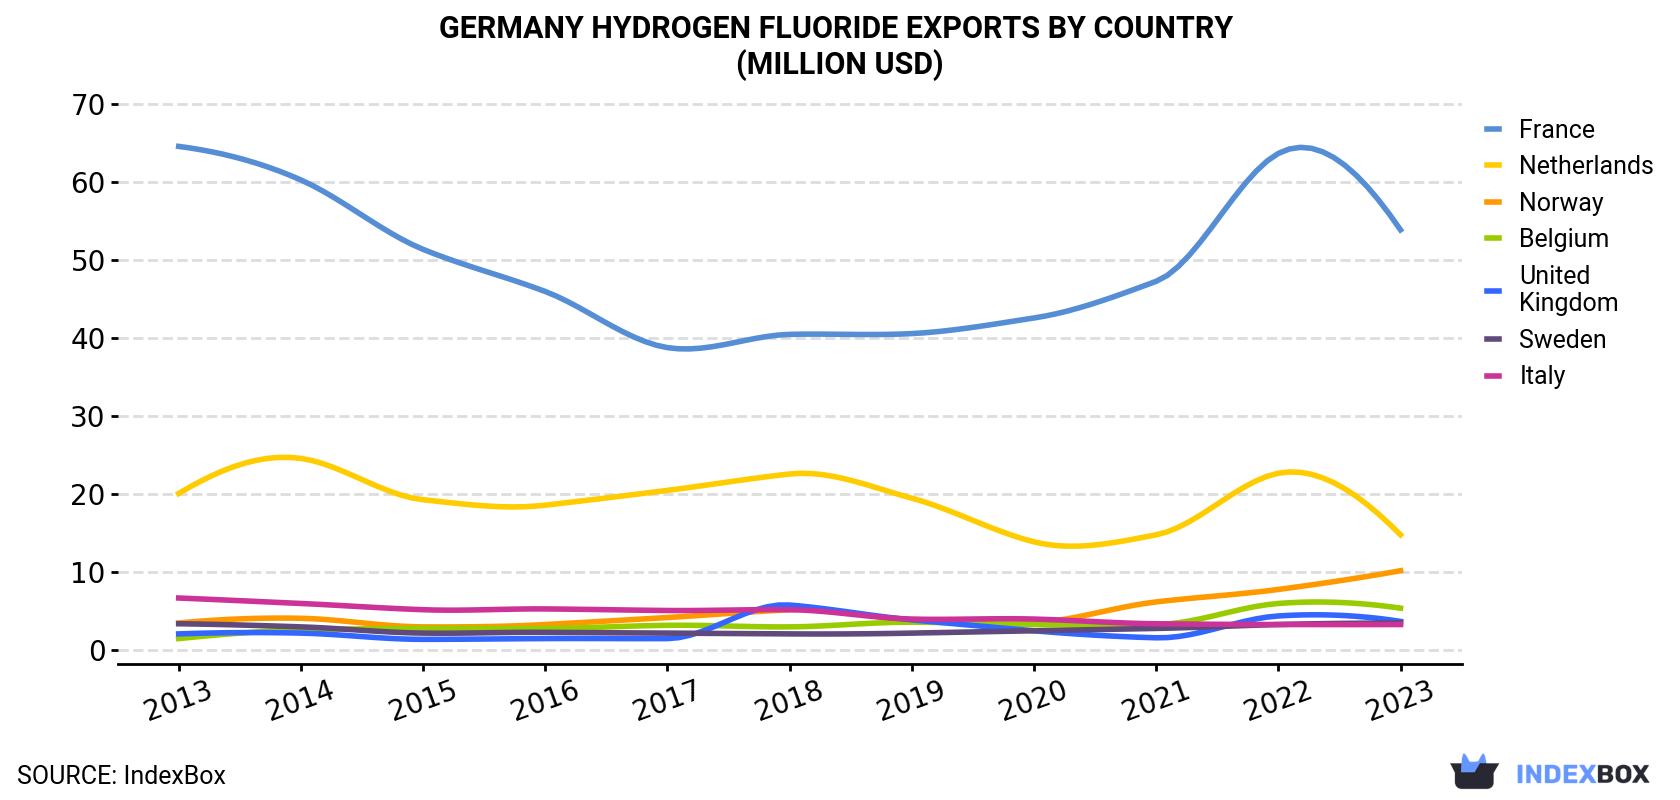 Germany Hydrogen Fluoride Exports By Country (Million USD)